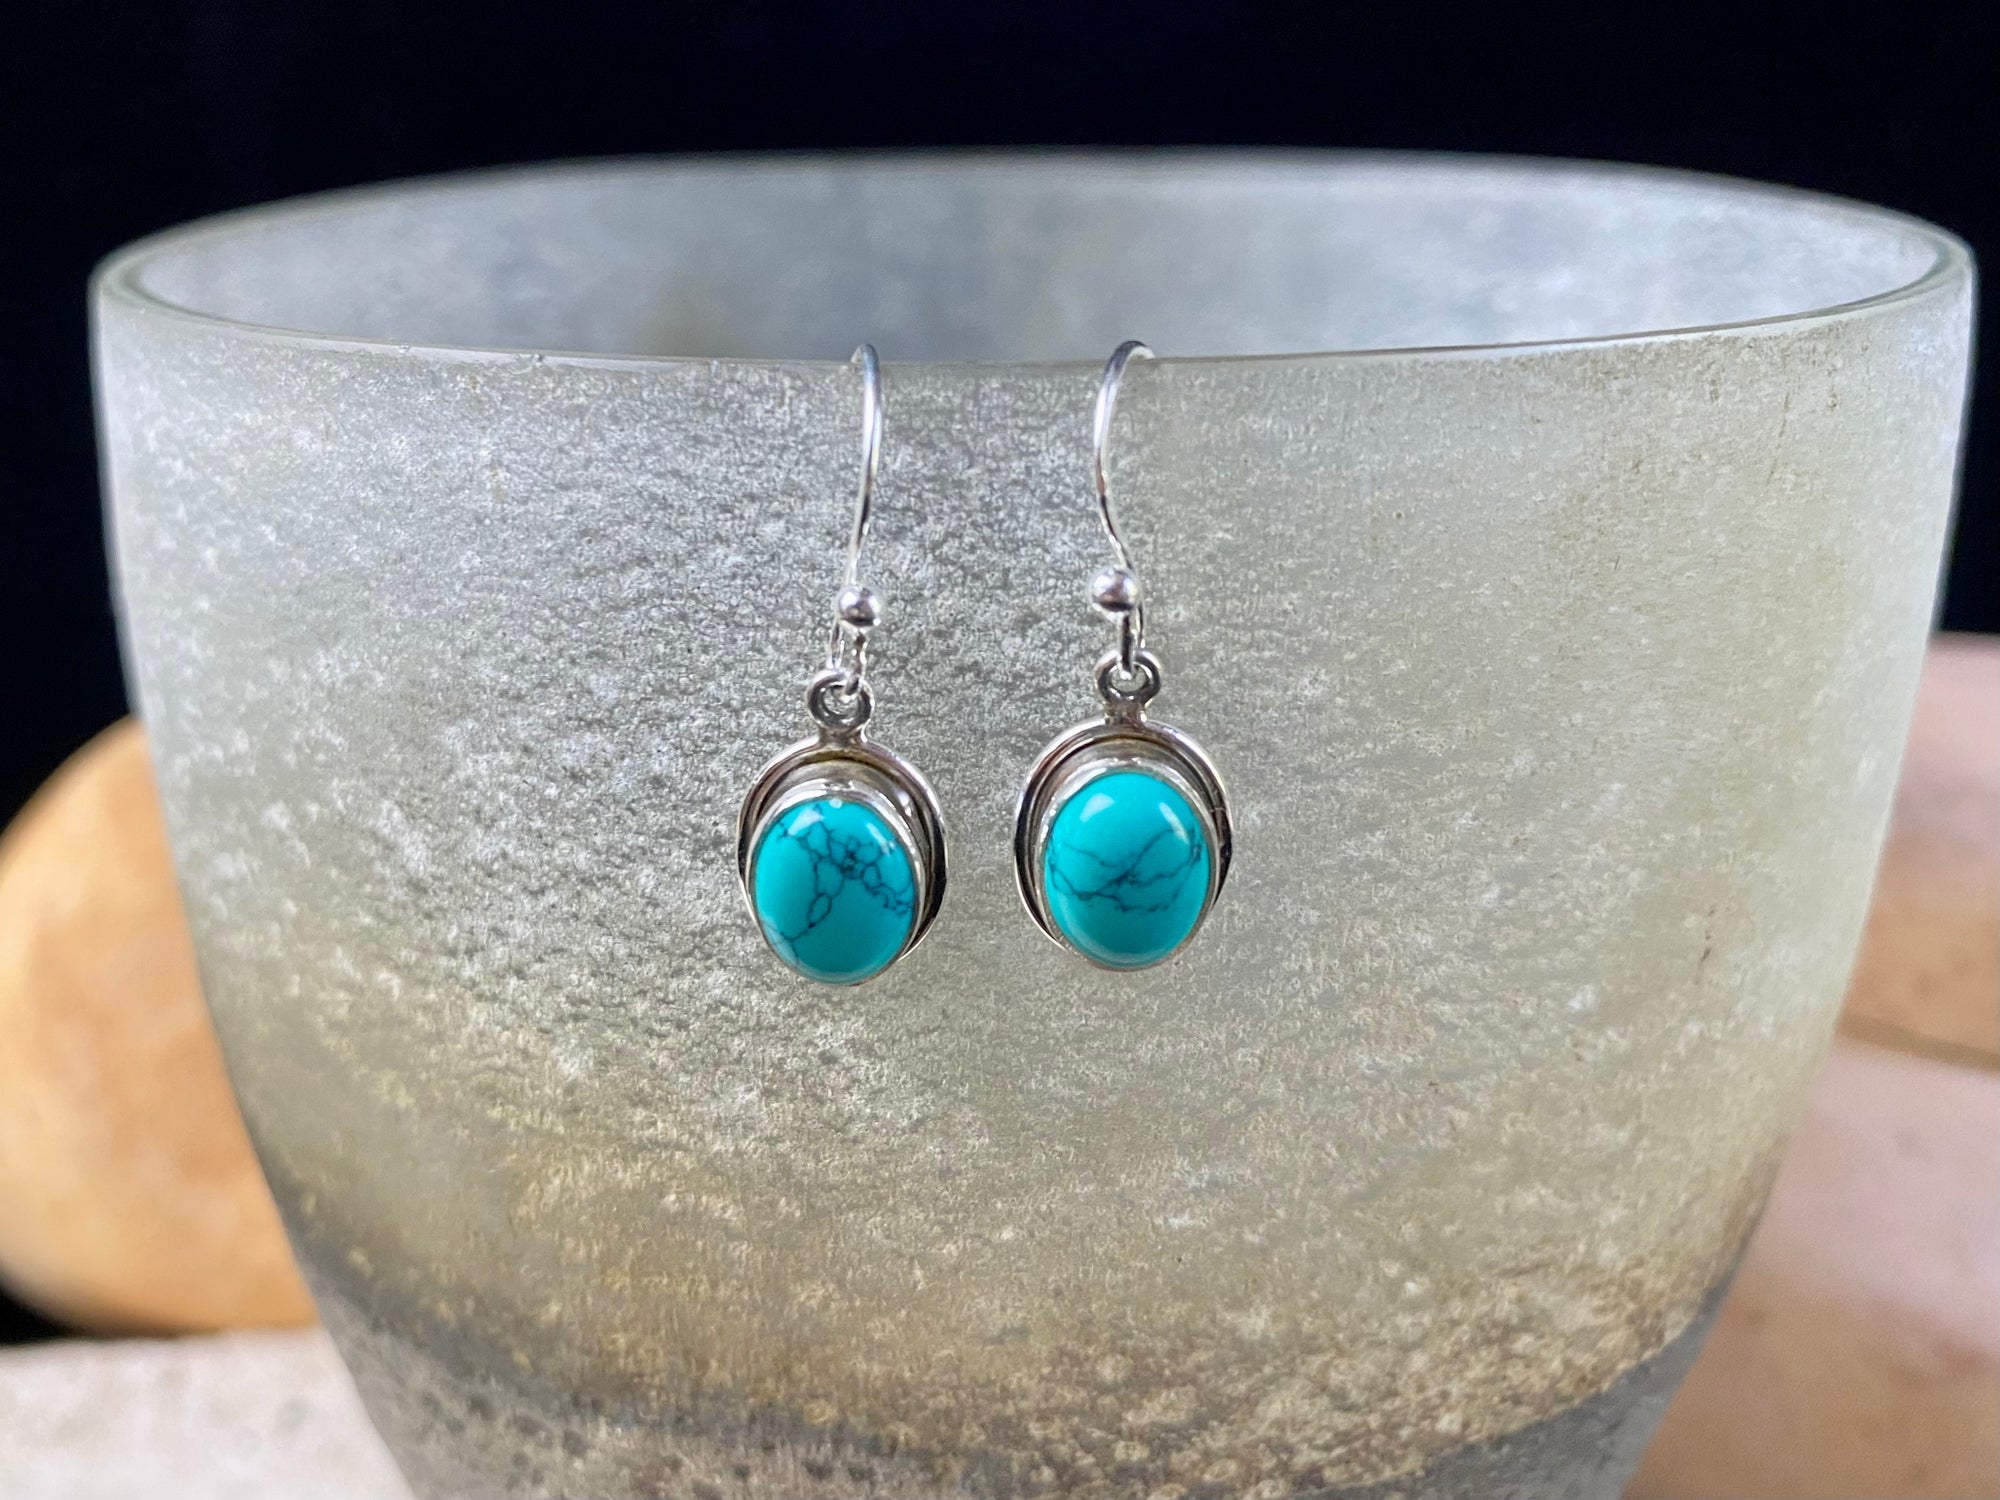 Simply elegant oval earrings with a small shadow box bezel to show off the beauty of the natural cabochon gemstones. Sterling silver hooks complete the look. Our earrings are open-backed to allow the light of the stones to show through. Length including hook 2.5 cm